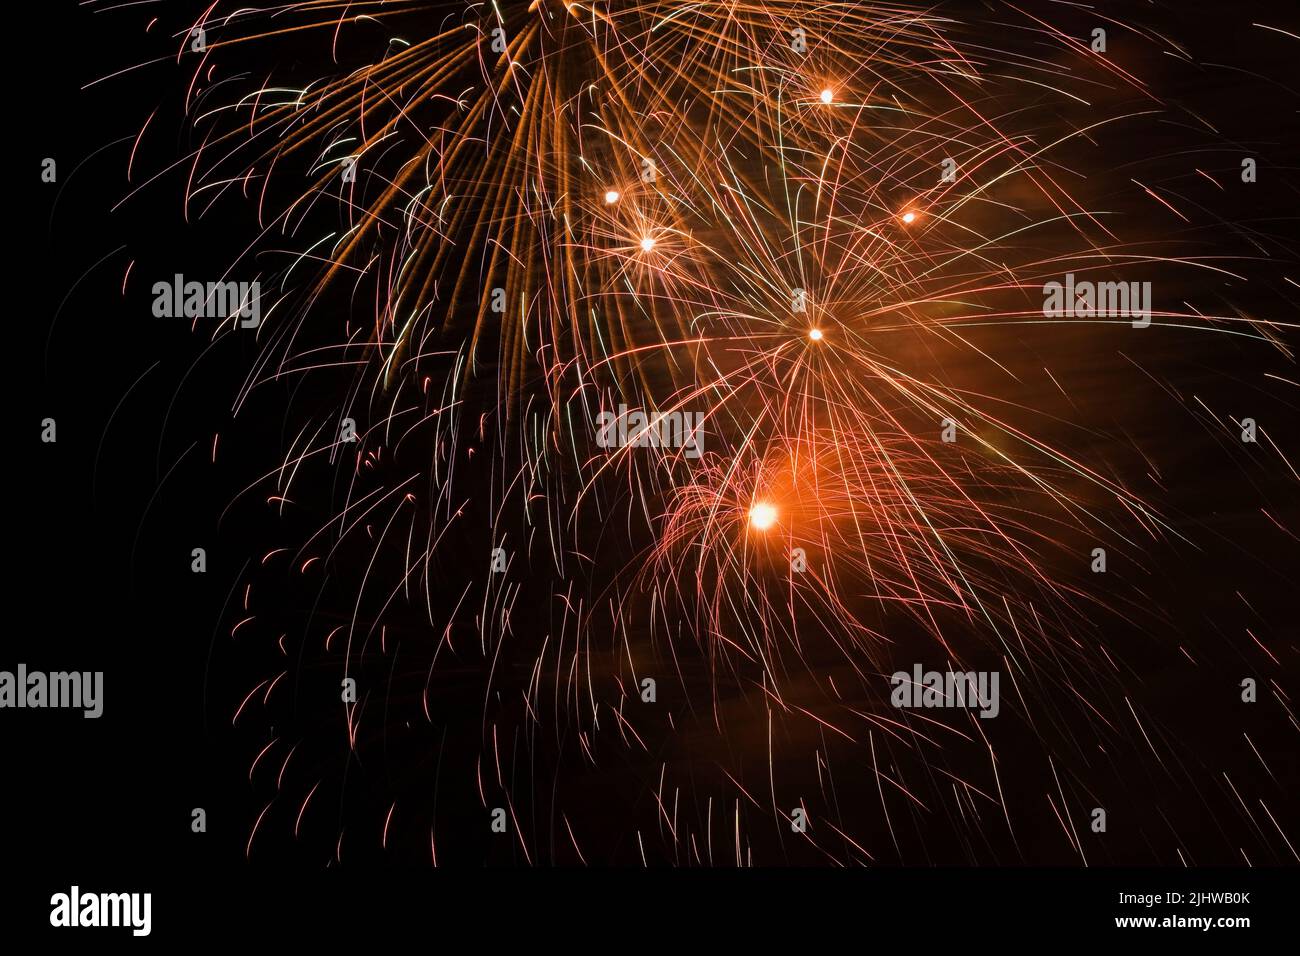 Gold, purple, red, white, yellow and green fireworks in the night sky, Quebec, Canada Stock Photo